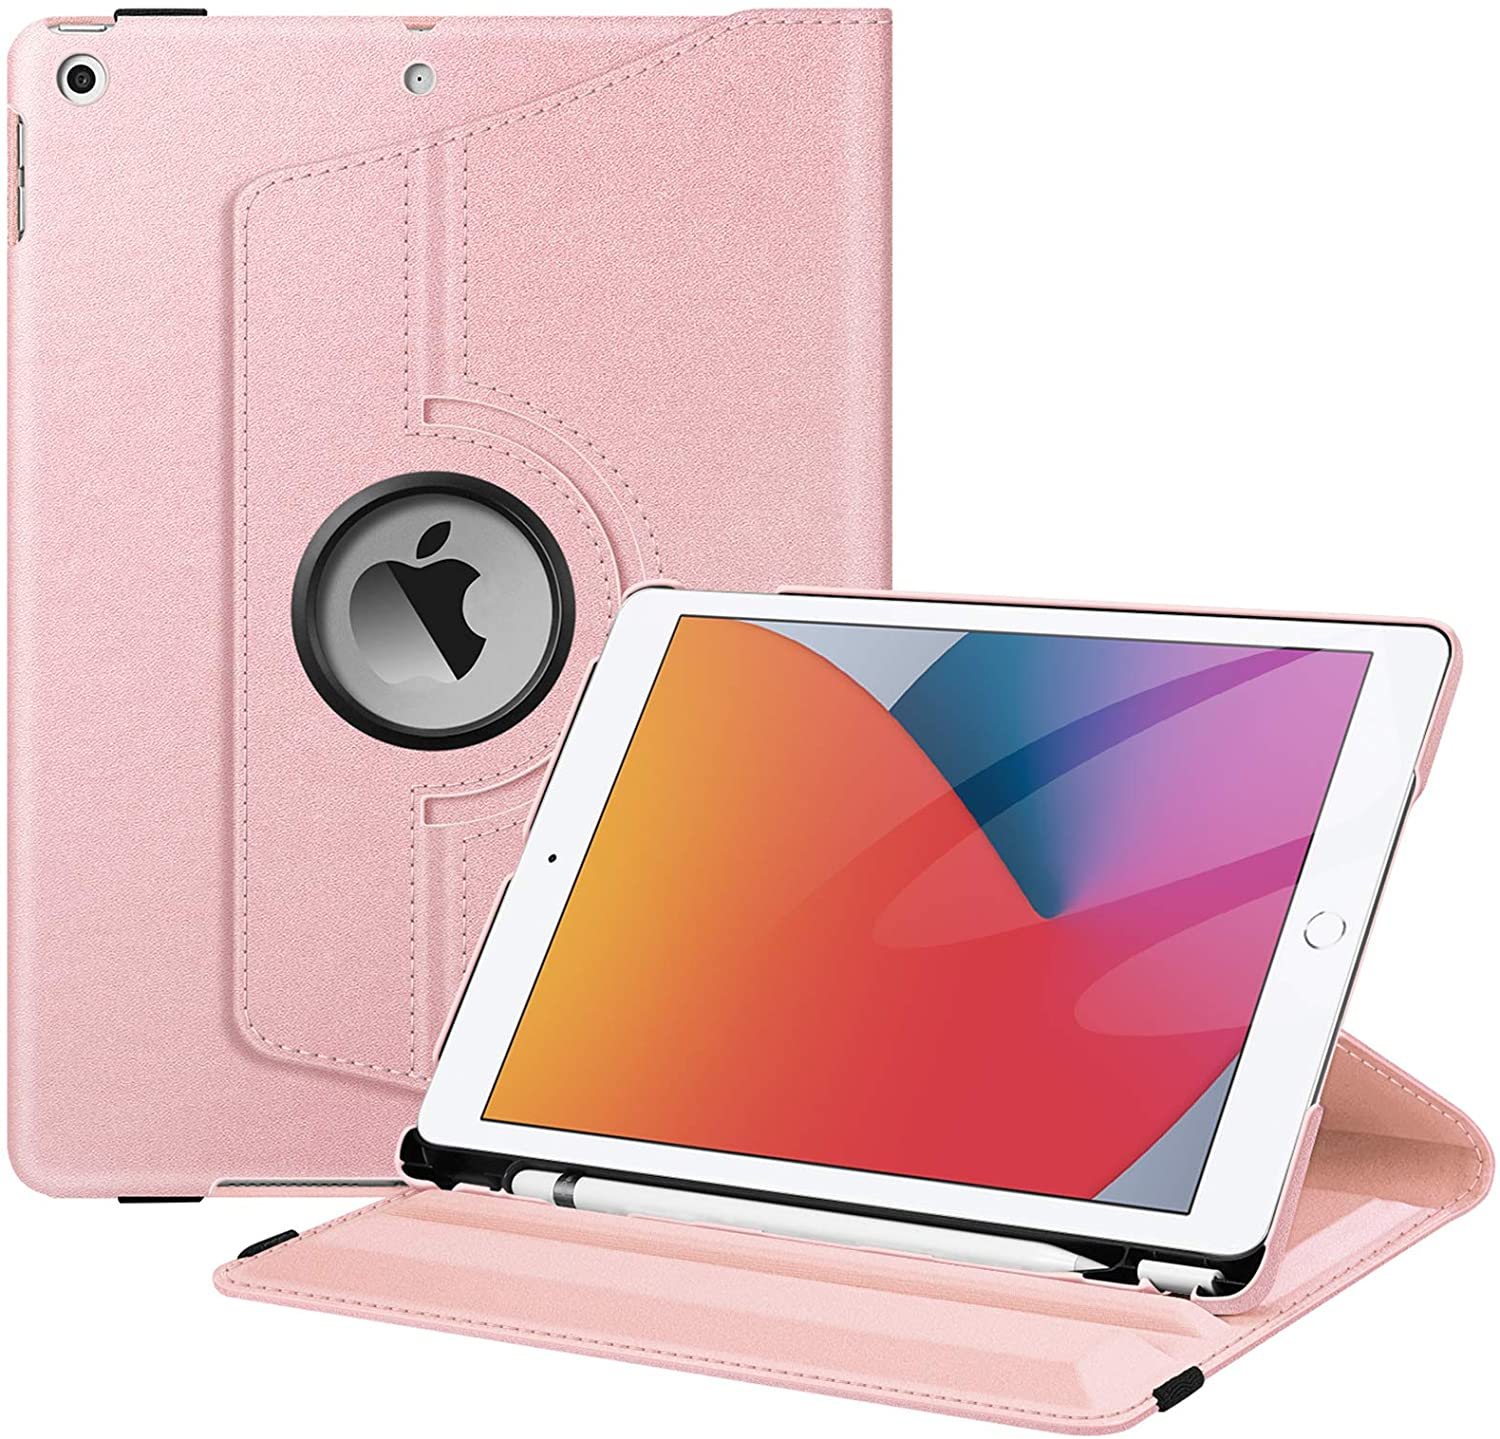 Hülle, Roségold Apple, 2020 Zoll / FINTIE Bookcover, und Modell 10.2 Generation, (8. 7 iPad 2019),